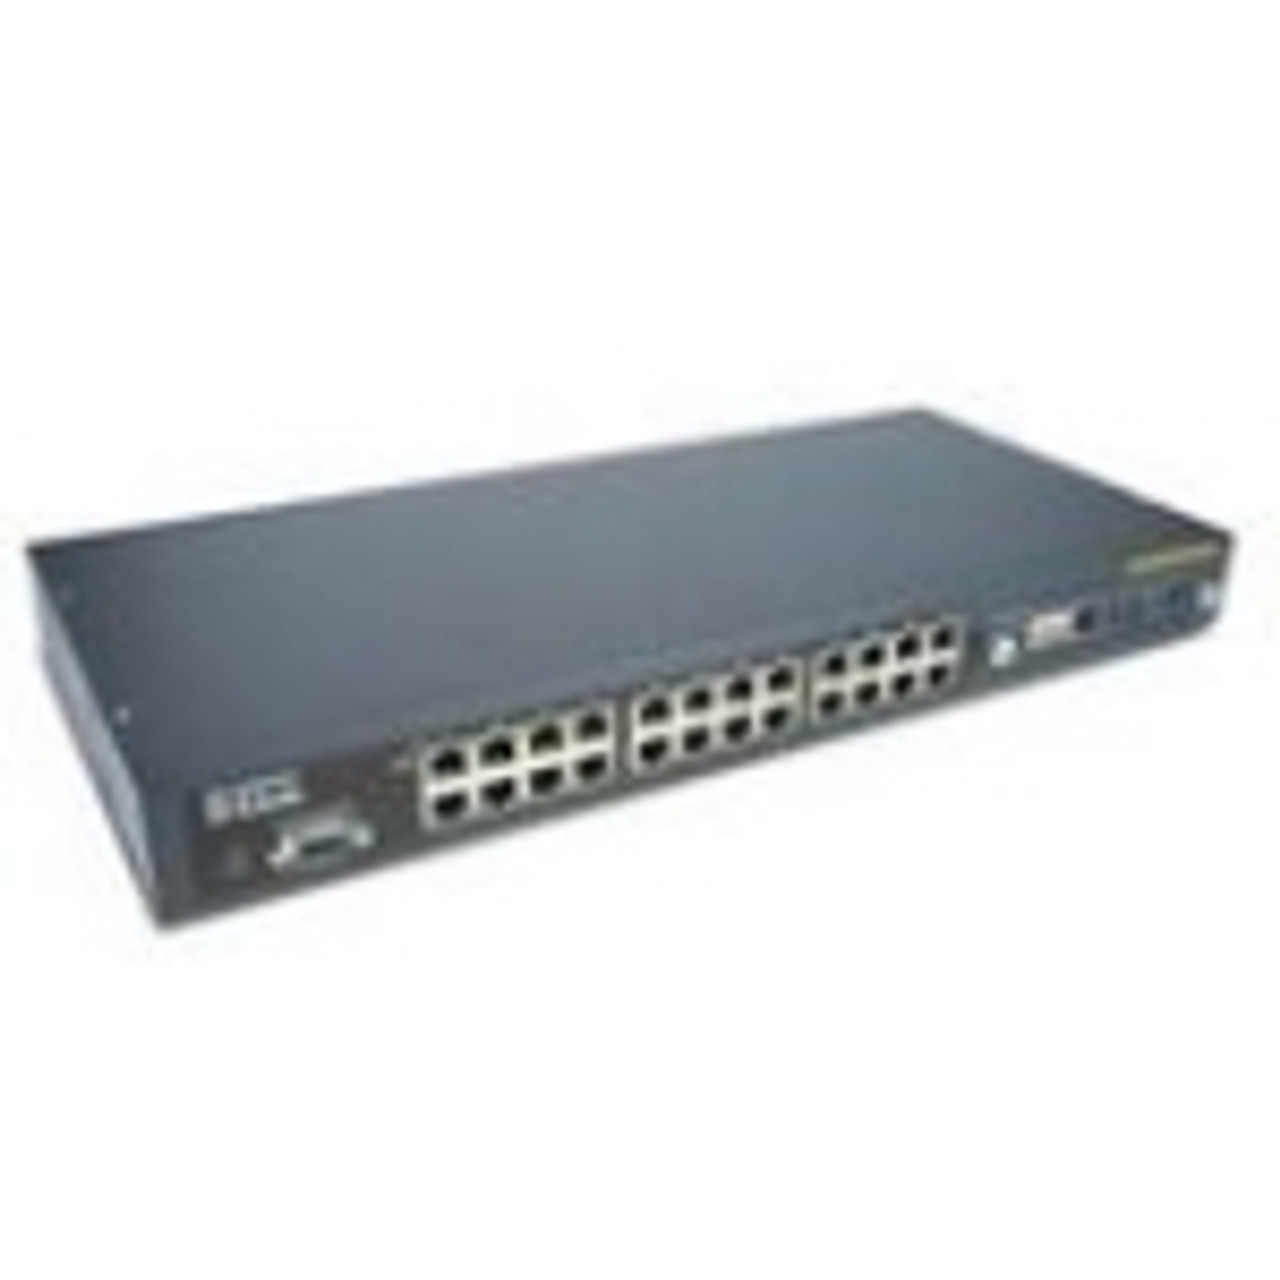 DES-3326S D-Link Routing Switch 24 Ports Manageable 7 x Expansion Slots 10/100Base-TX 24 x Network, 6 x Expansion Slot Rack-mountable (Refurbished)